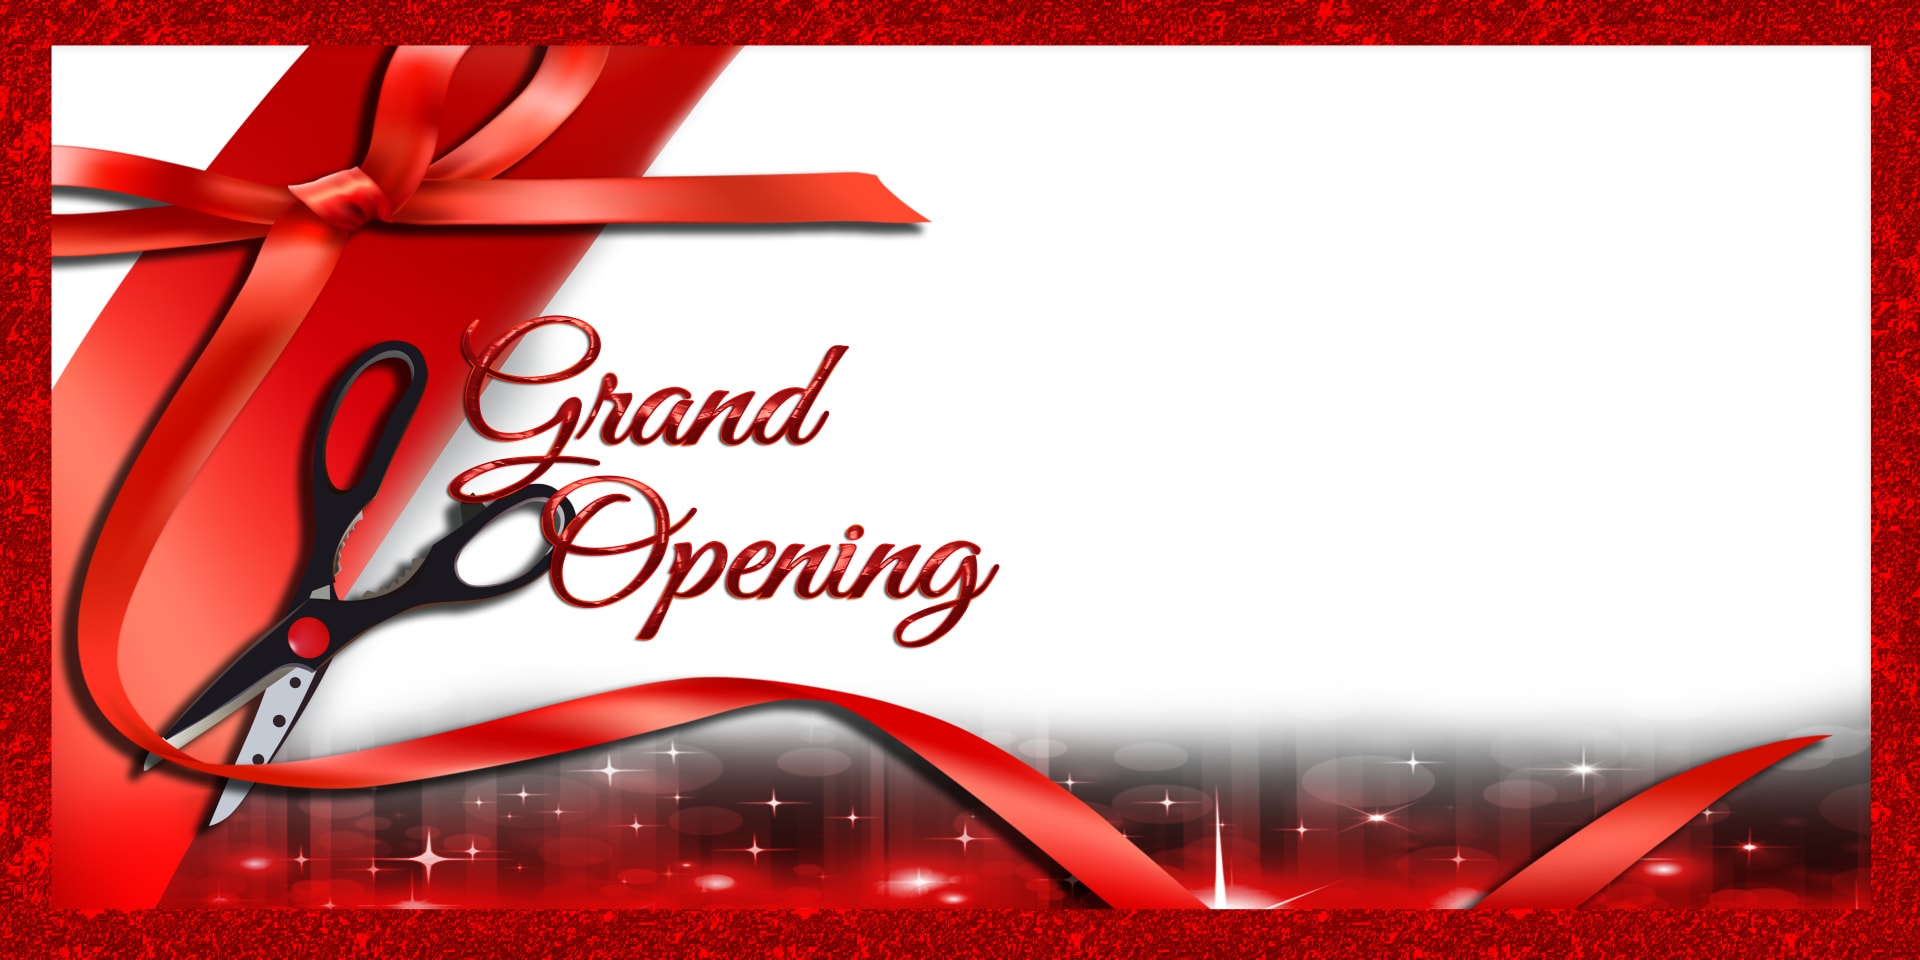 Business Banner - Grand Opening Ribbon Cutting Banner